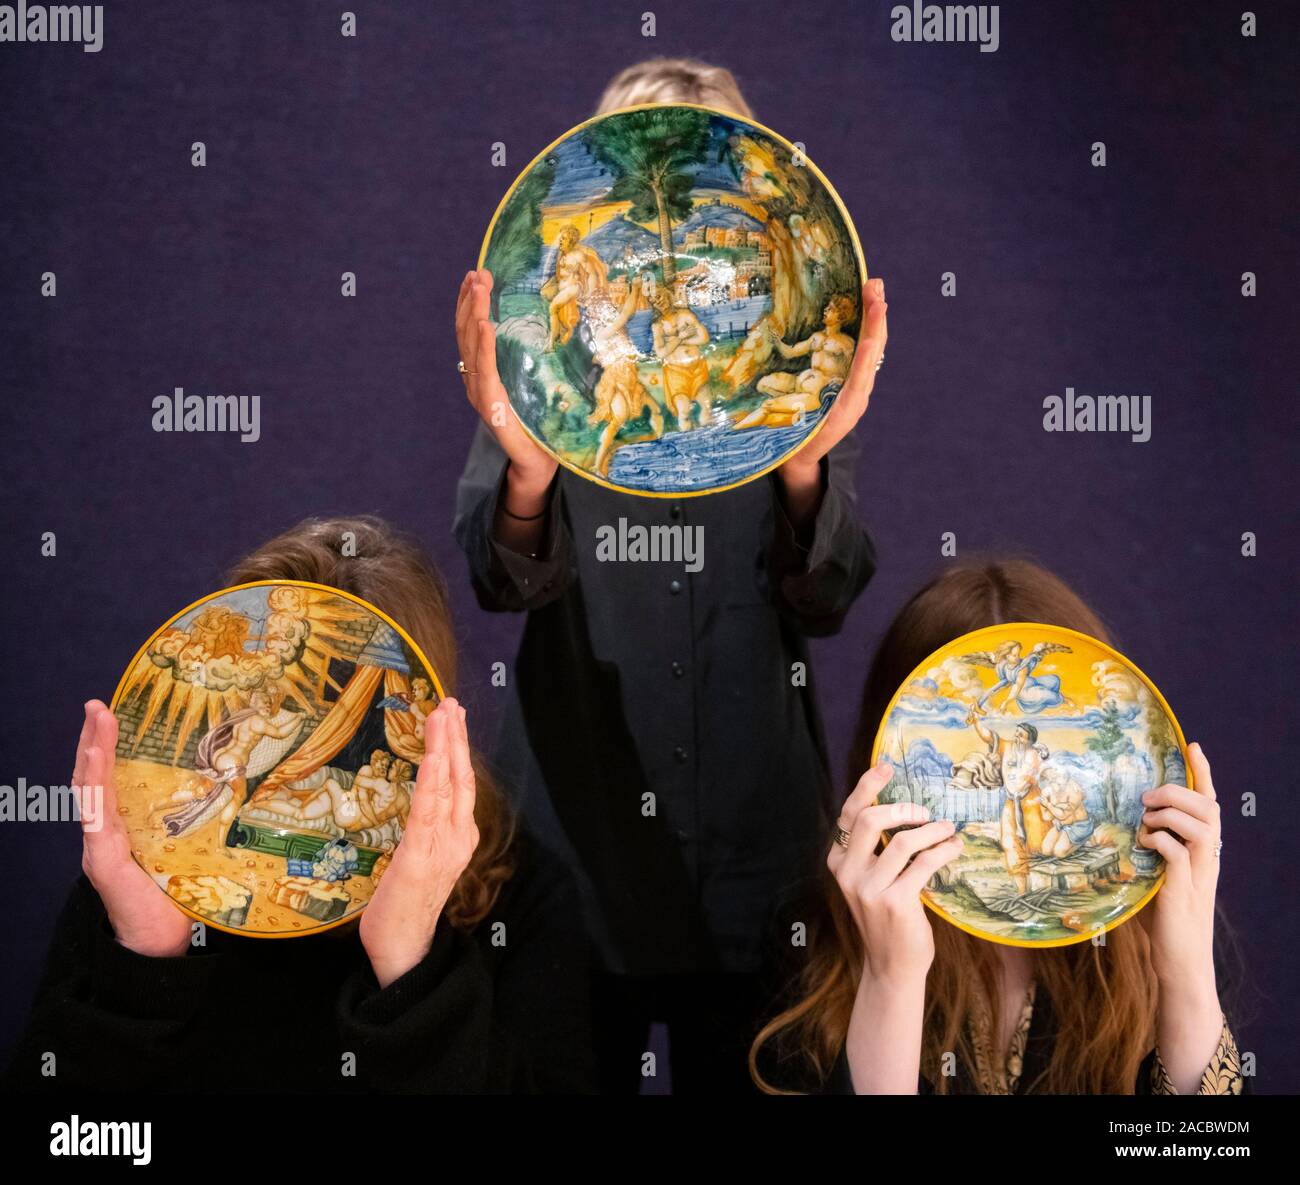 Bonhams, London, UK. 2nd December 2019. Fine European Ceramics offered for sale on 4 December. Image: (Left to right): A maiolica istoriato plate, Urbino or Venice, mid 16th century £3,000-5,000; A Duchy of Urbino maiolica istoriato footed dish, circa 1550, £ 2,000-3,000; An Urbino maiolica istoriatio dish, attributed to the Patanazzi workshop, circa 1560, £3,500-4,500. Credit: Malcolm Park/Alamy Live News. Stock Photo